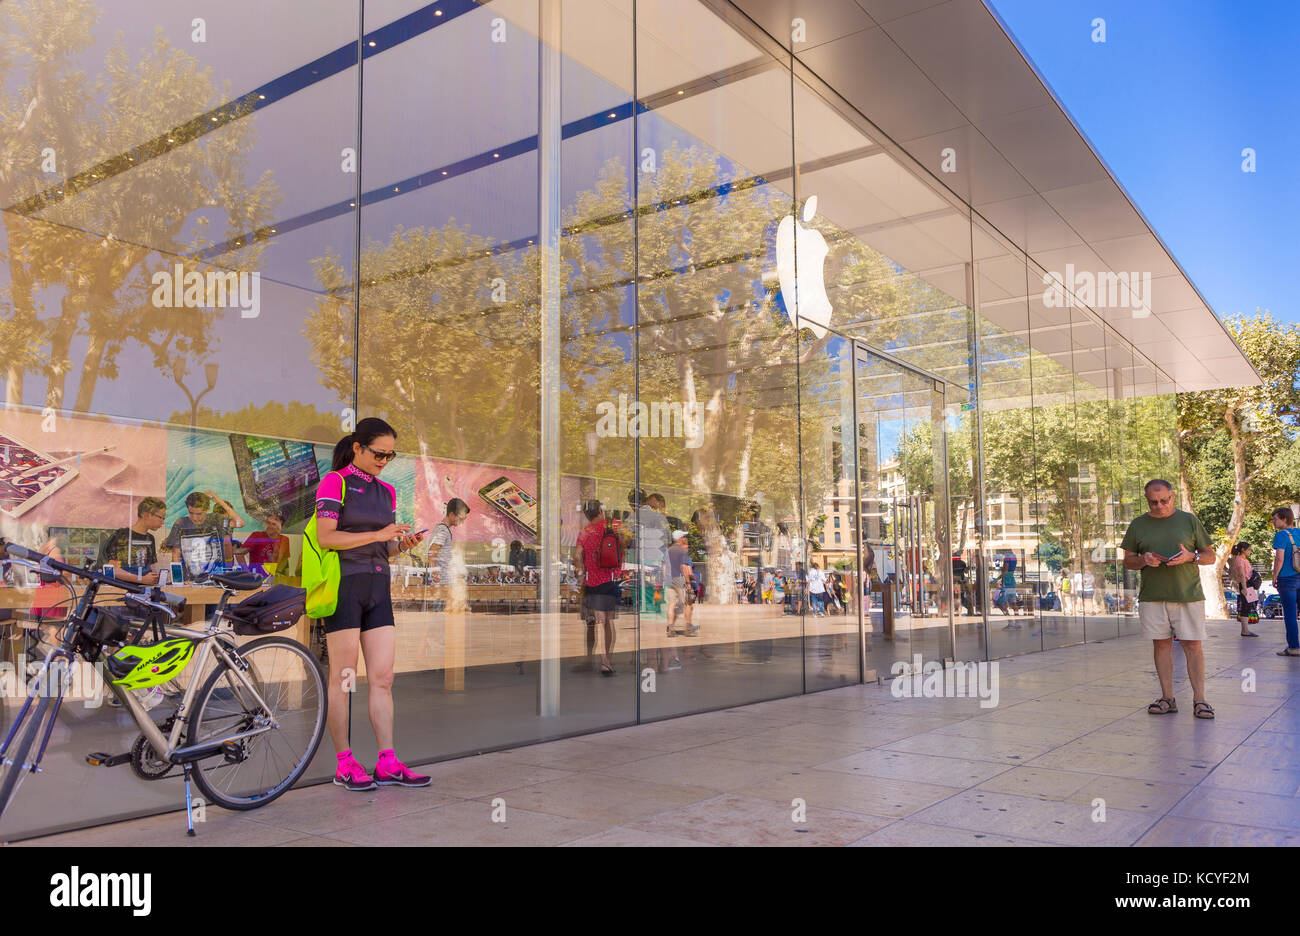 AIX-EN-PROVENCE, FRANCE - Apple Store exterior and people, at La Rotonde. Stock Photo